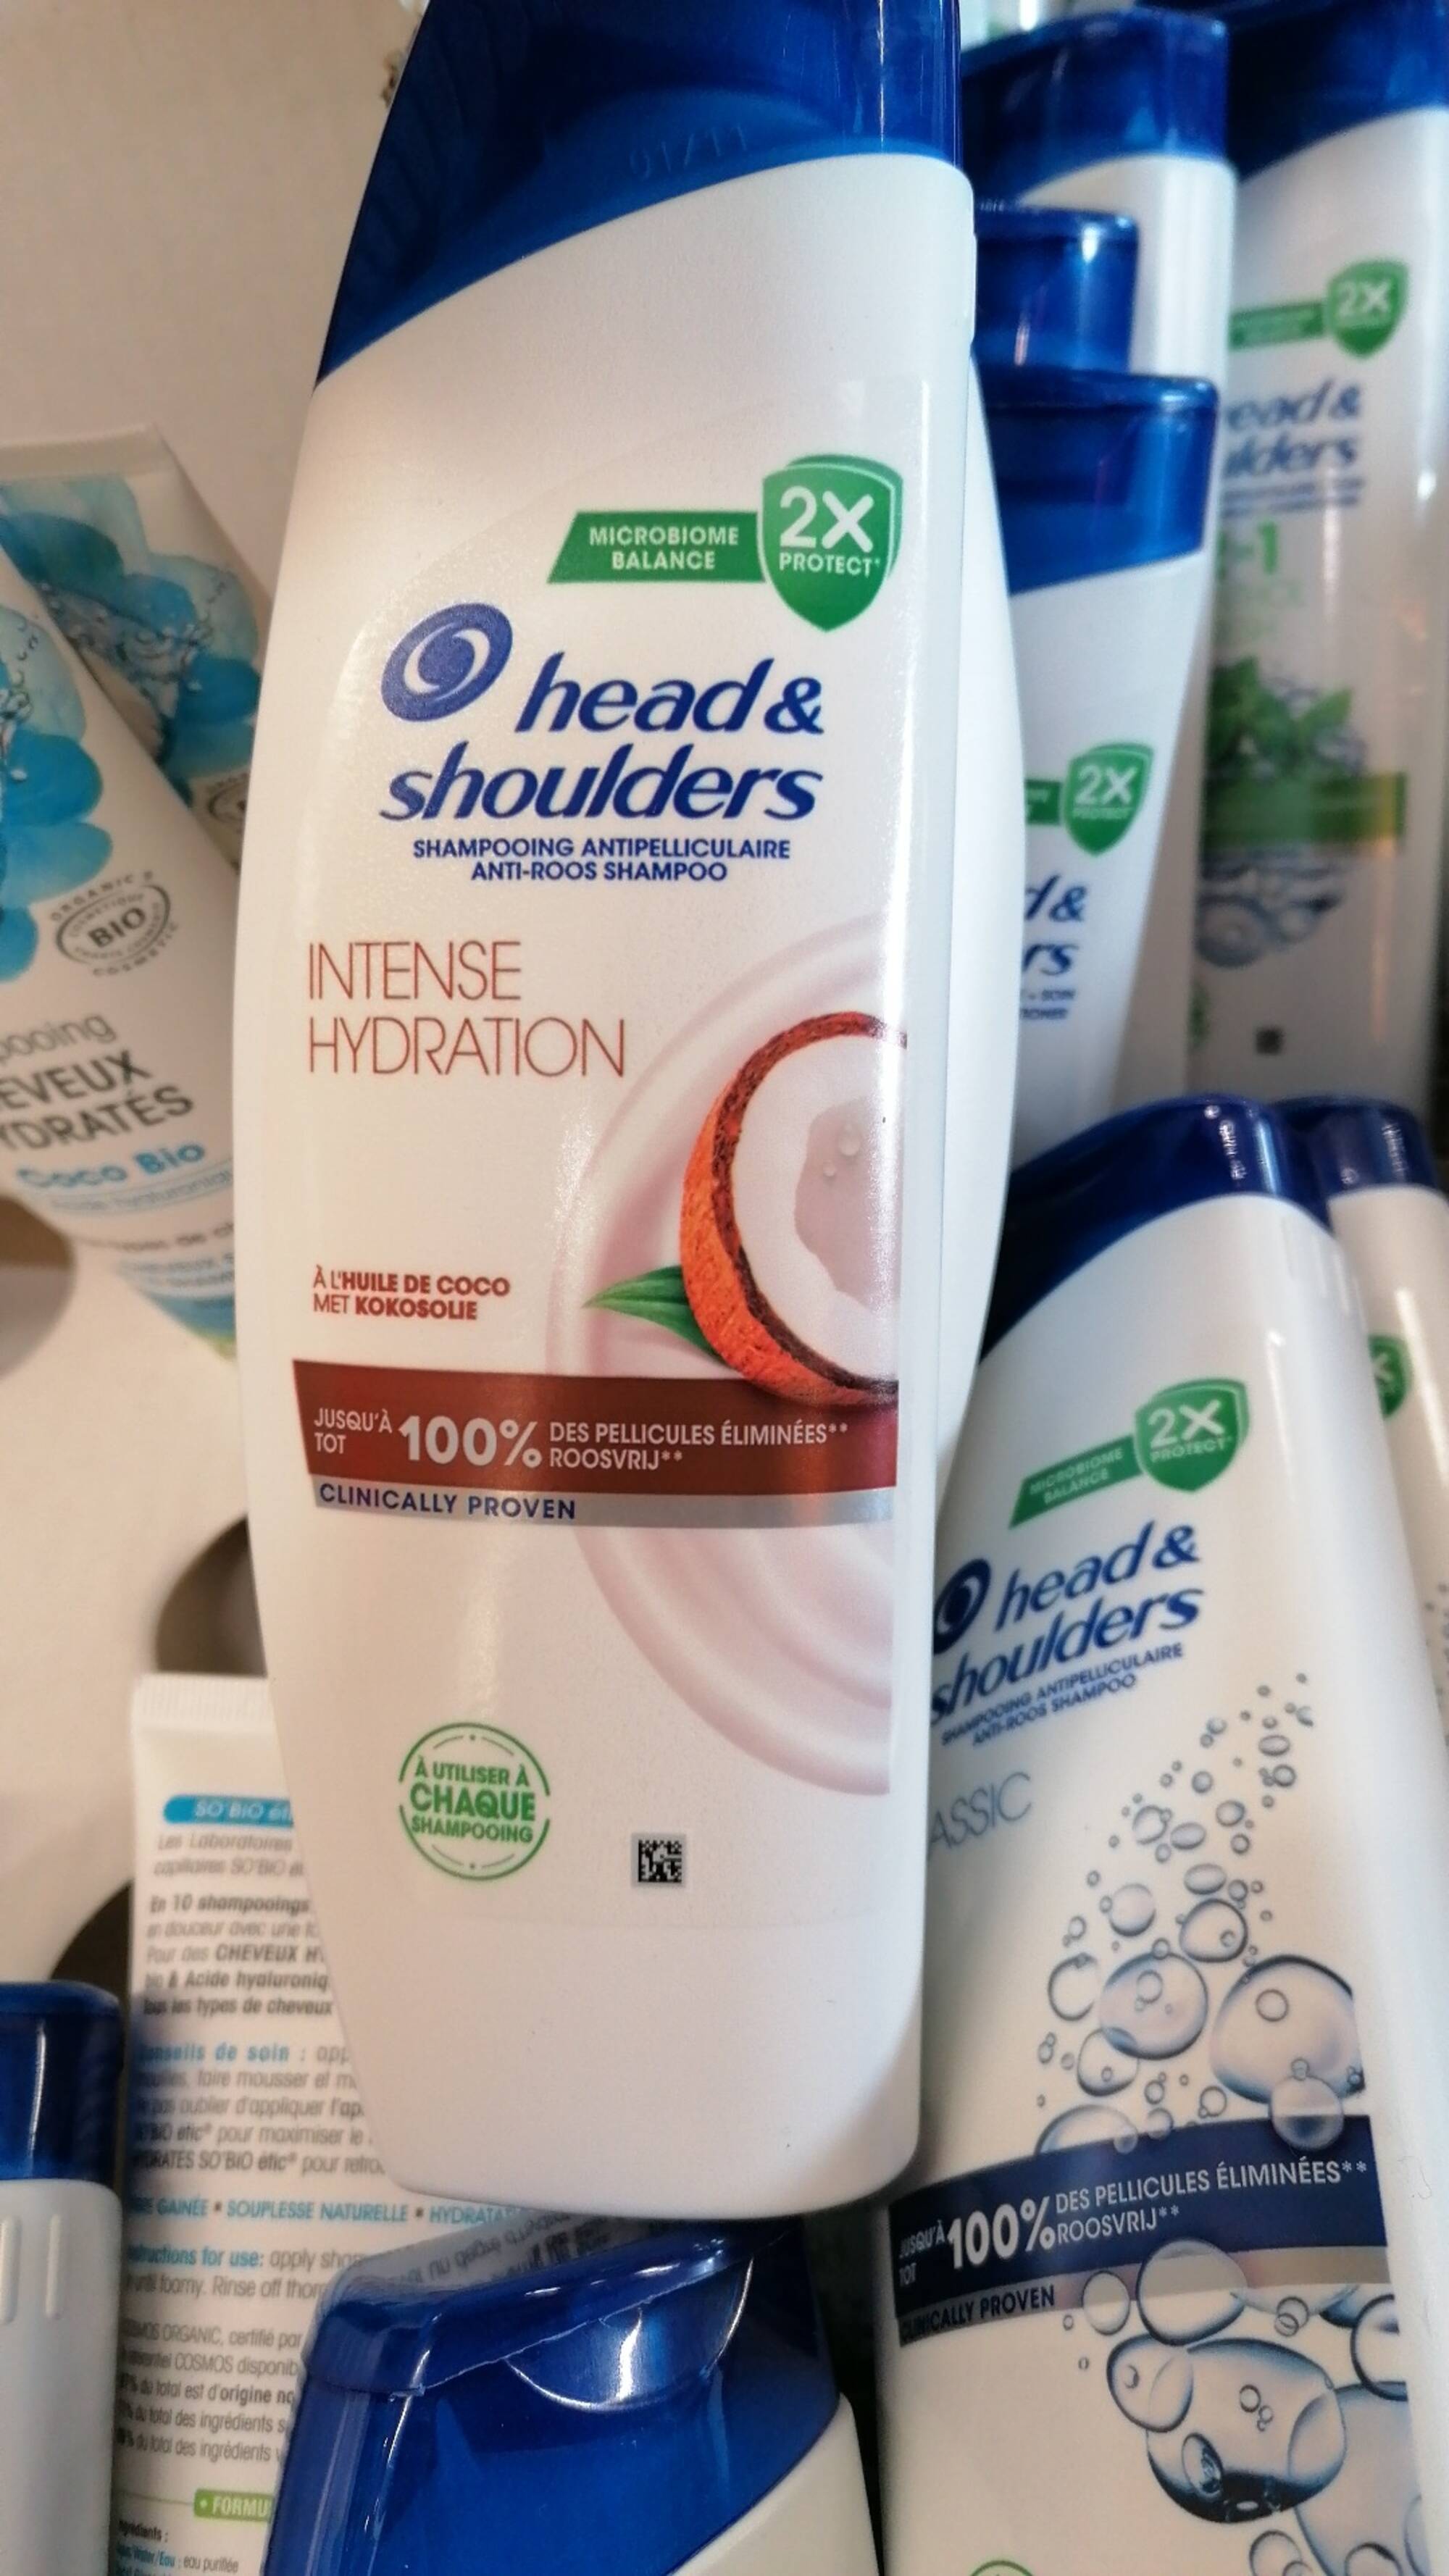 HEAD & SHOULDERS - Intense hydration - Shampooing antipelliculaire